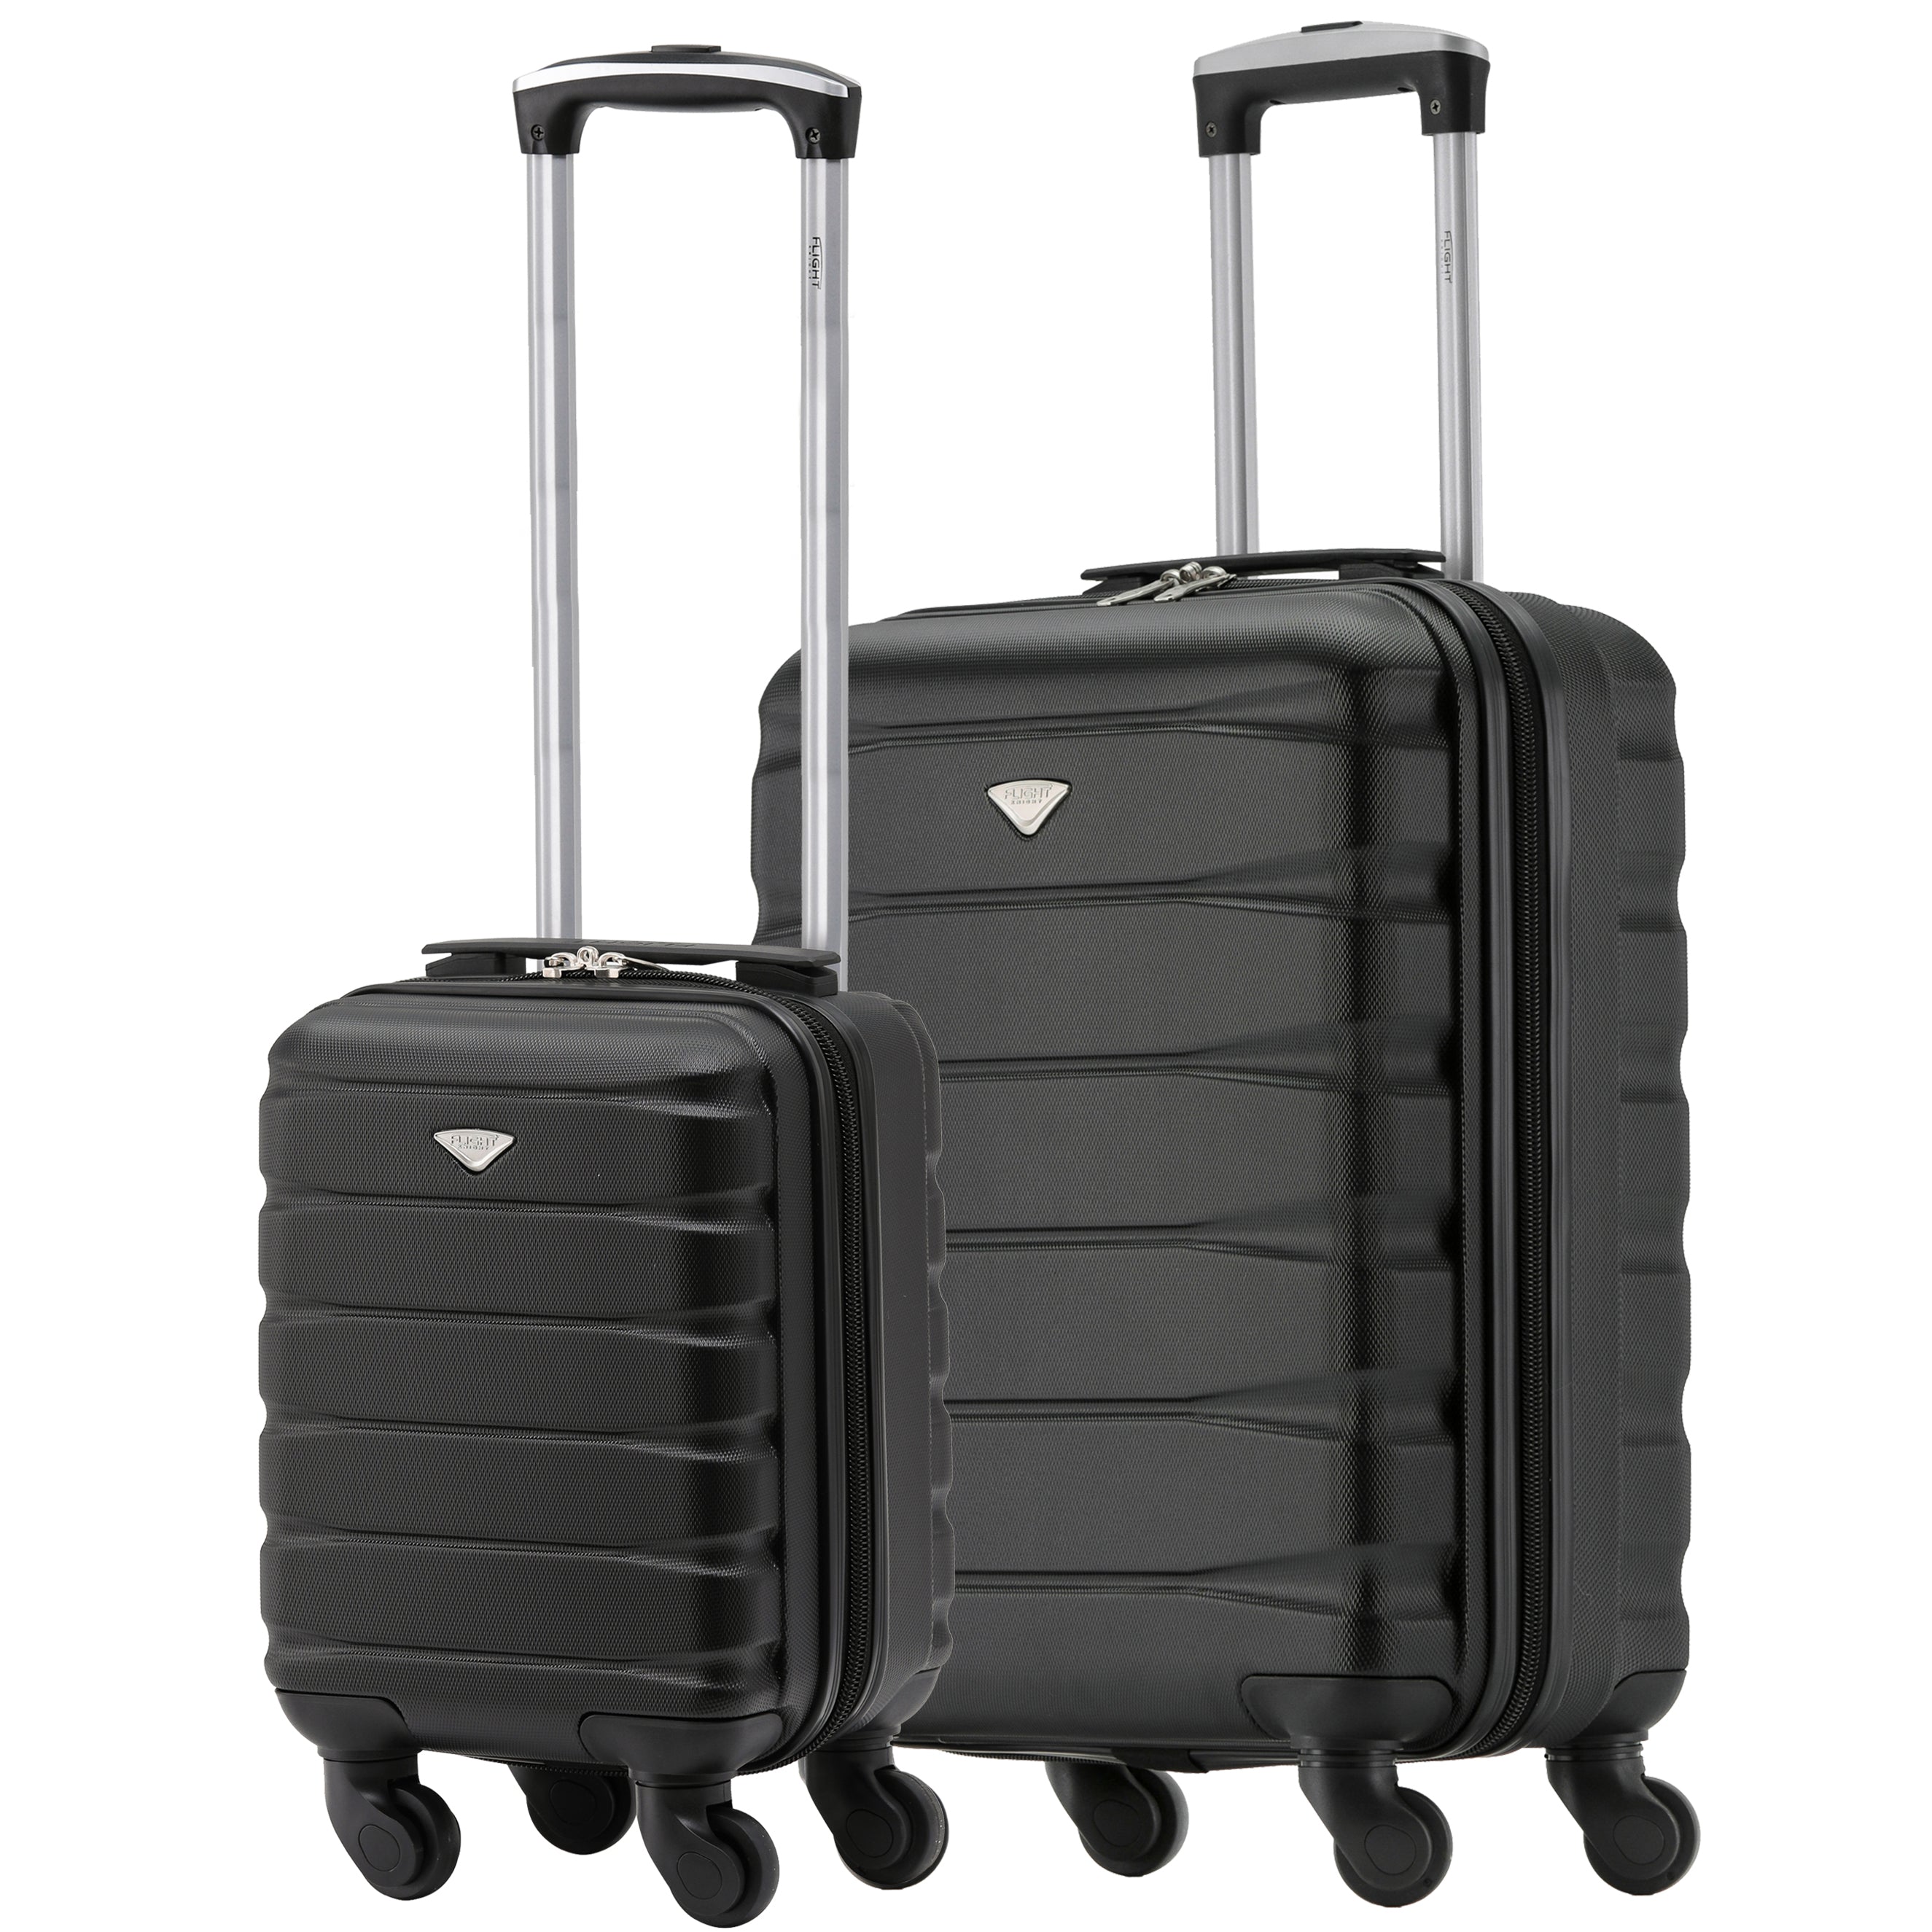 55x40x20cm & 40x20x25cm Set of 2 Lightweight 4 Wheel Hard Case Carry On Hand Luggage - Ryanair Maximum Size for Overhead Cabin & Under Seat Carry-On